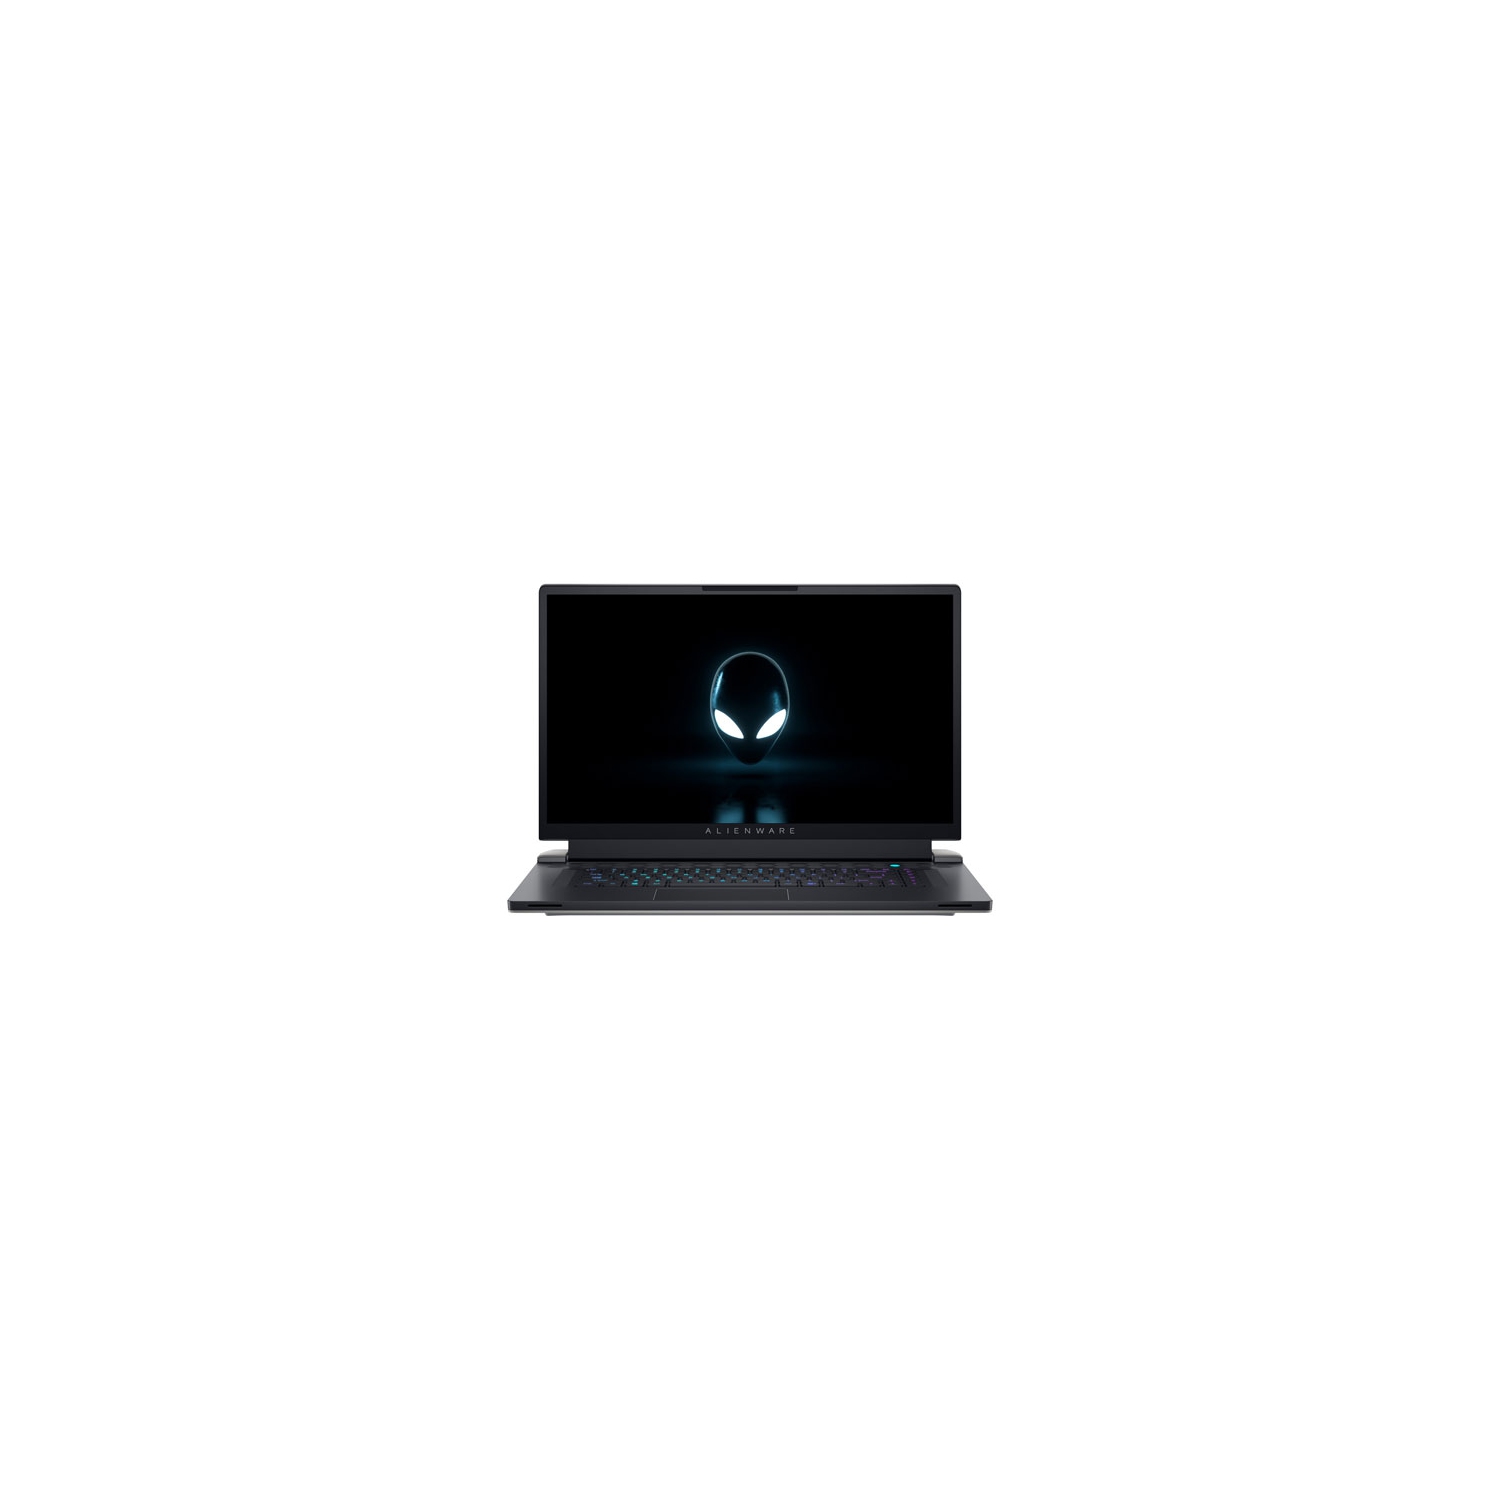 Refurbished (Excellent) - Alienware x17 17.3" Gaming Laptop - White (Intel Core i7-11800H/1TB SSD/16GB RAM/ RTX 3070/Win 11) - En